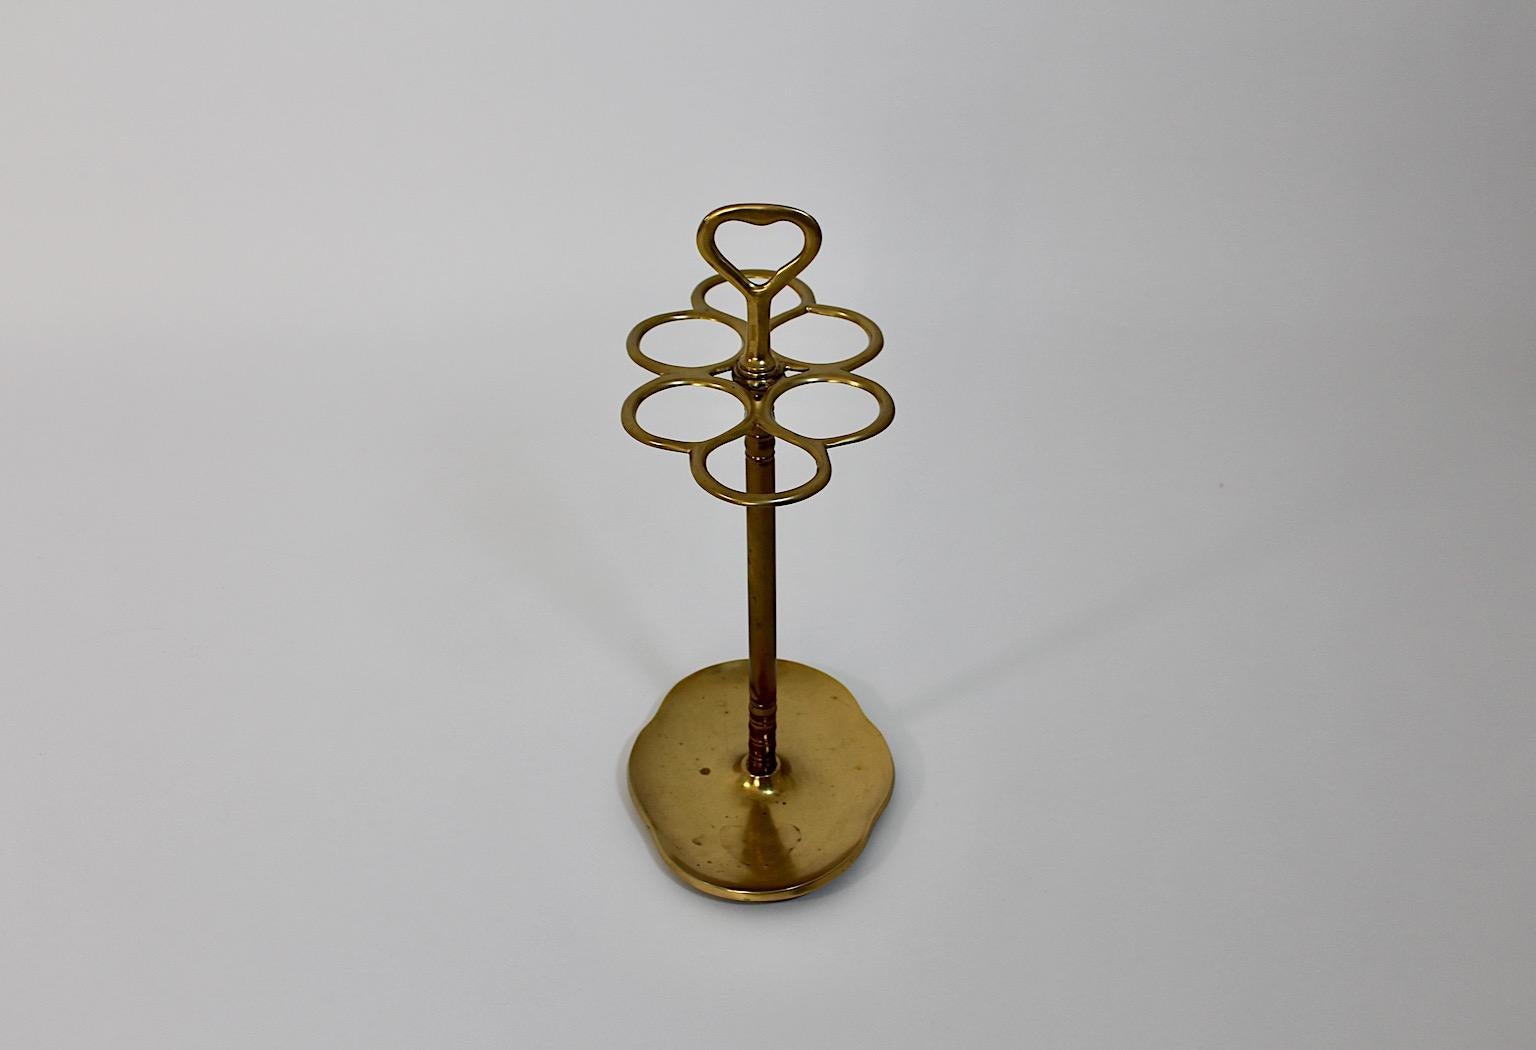 Hollywood Regency Style Vintage Brass Umbrella Stand Cane Holder 1970s Italy For Sale 5